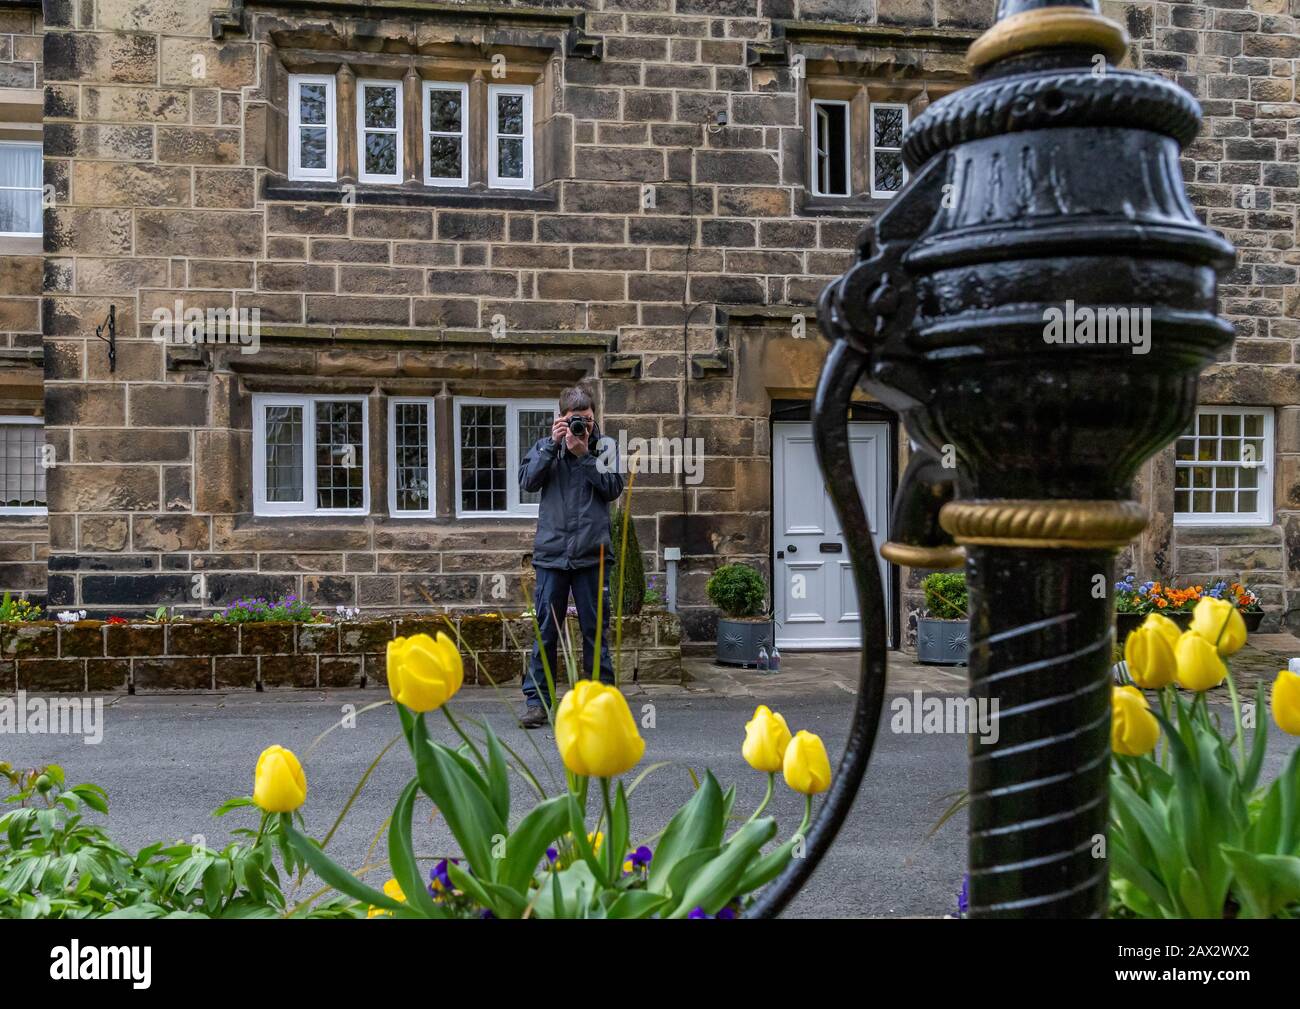 A man takes a photograph of a garden water pump feature in Esholt, Yorkshire, England. Stock Photo